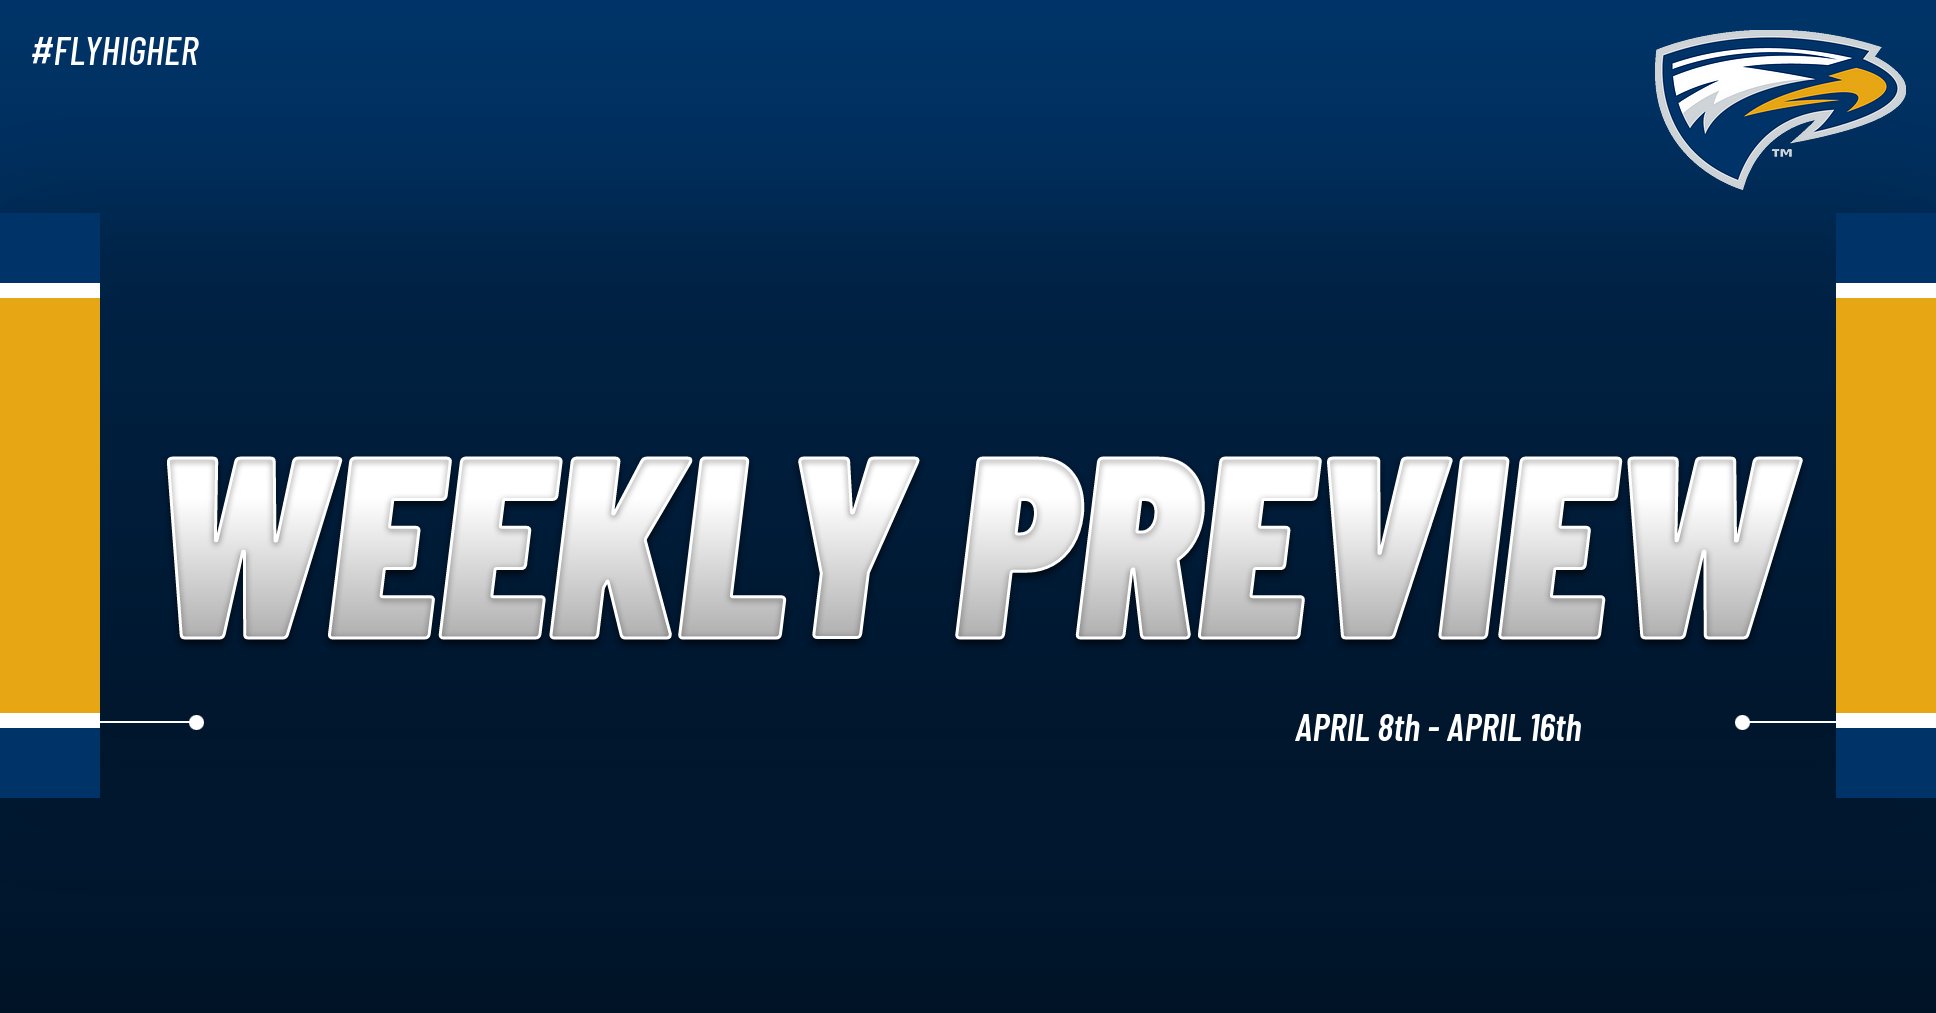 Emory Athletics Weekly Preview: April 8th - April 16th